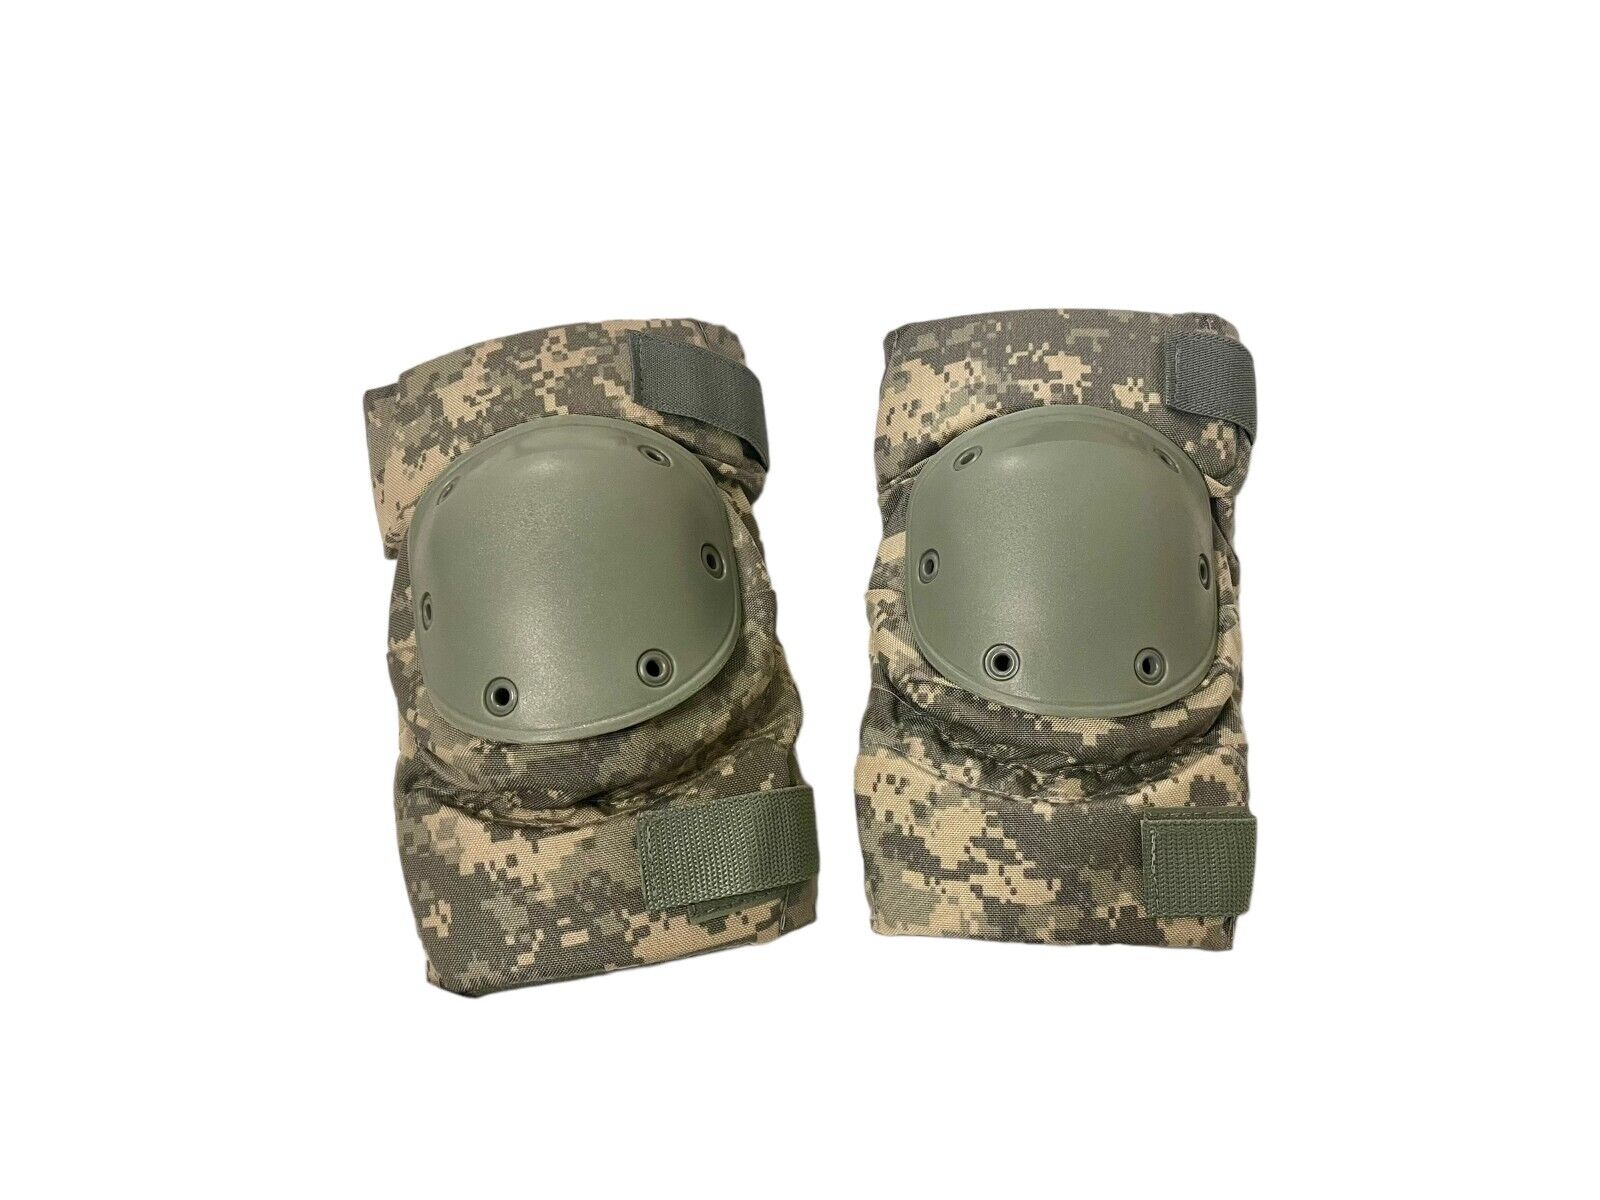 USGI Military Tactical Combat Knee Pads Pair, ACU Pattern, RFI Issue, Small EXC